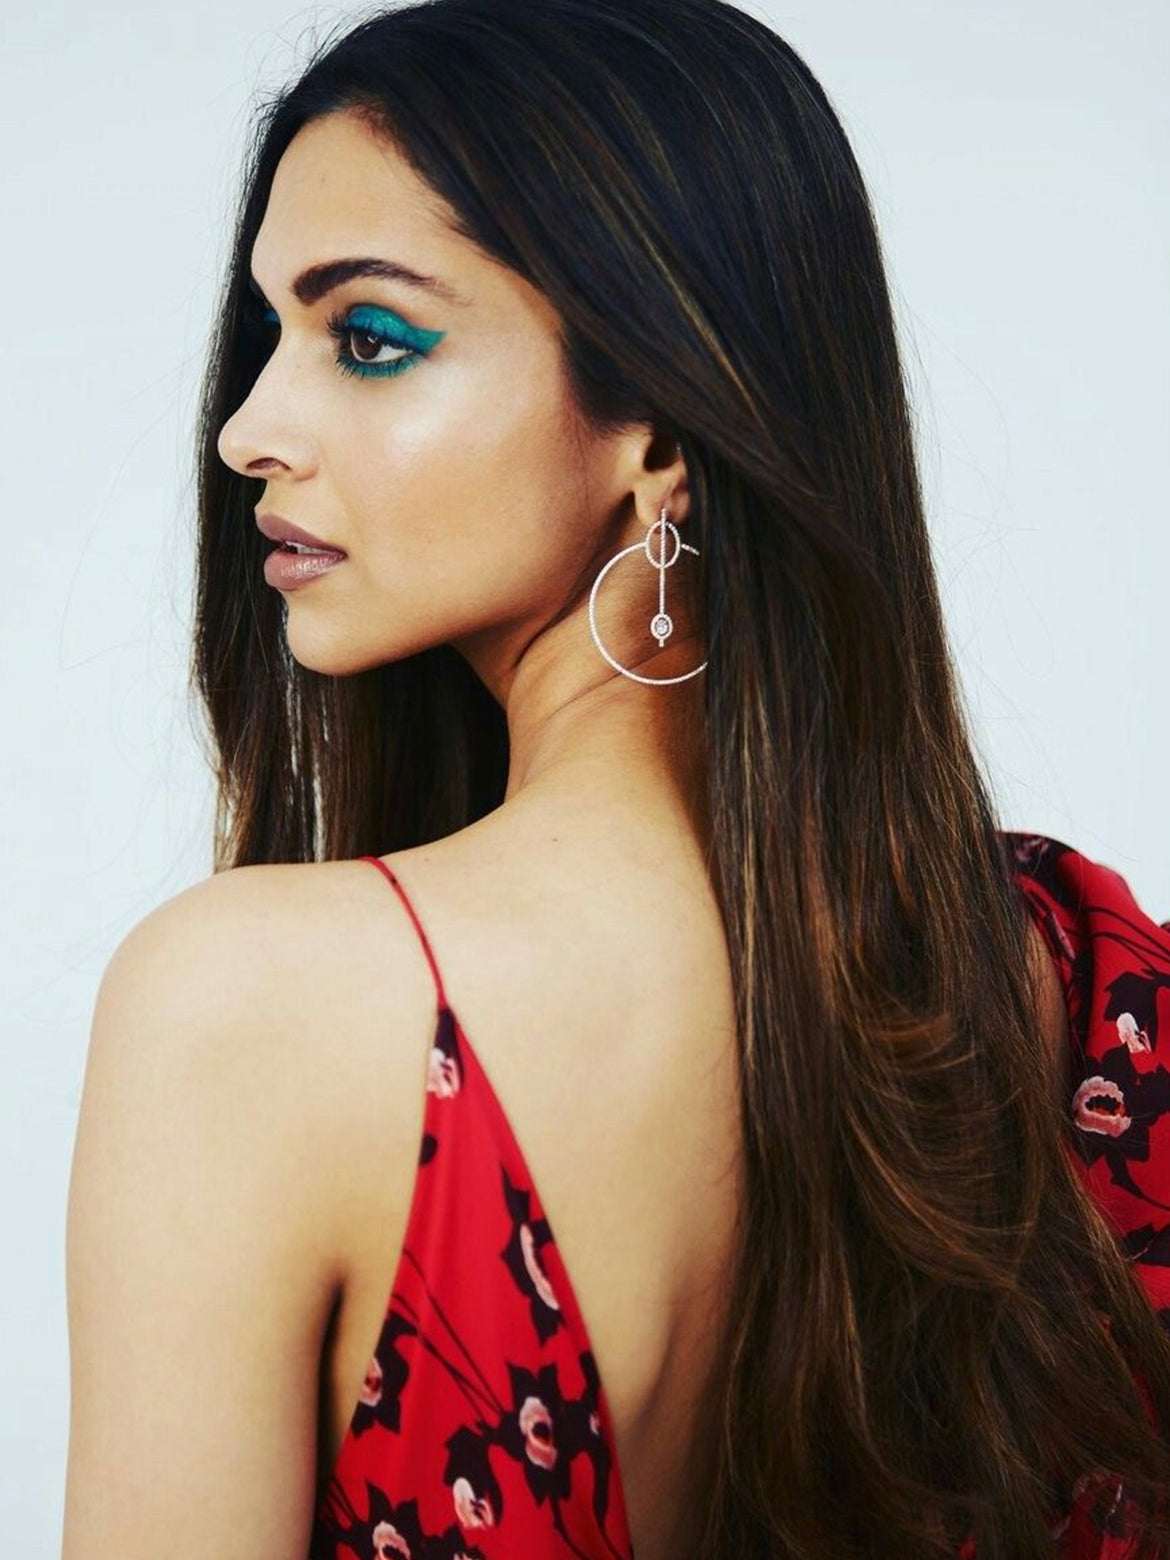 Hot makeup trends to try out this party season